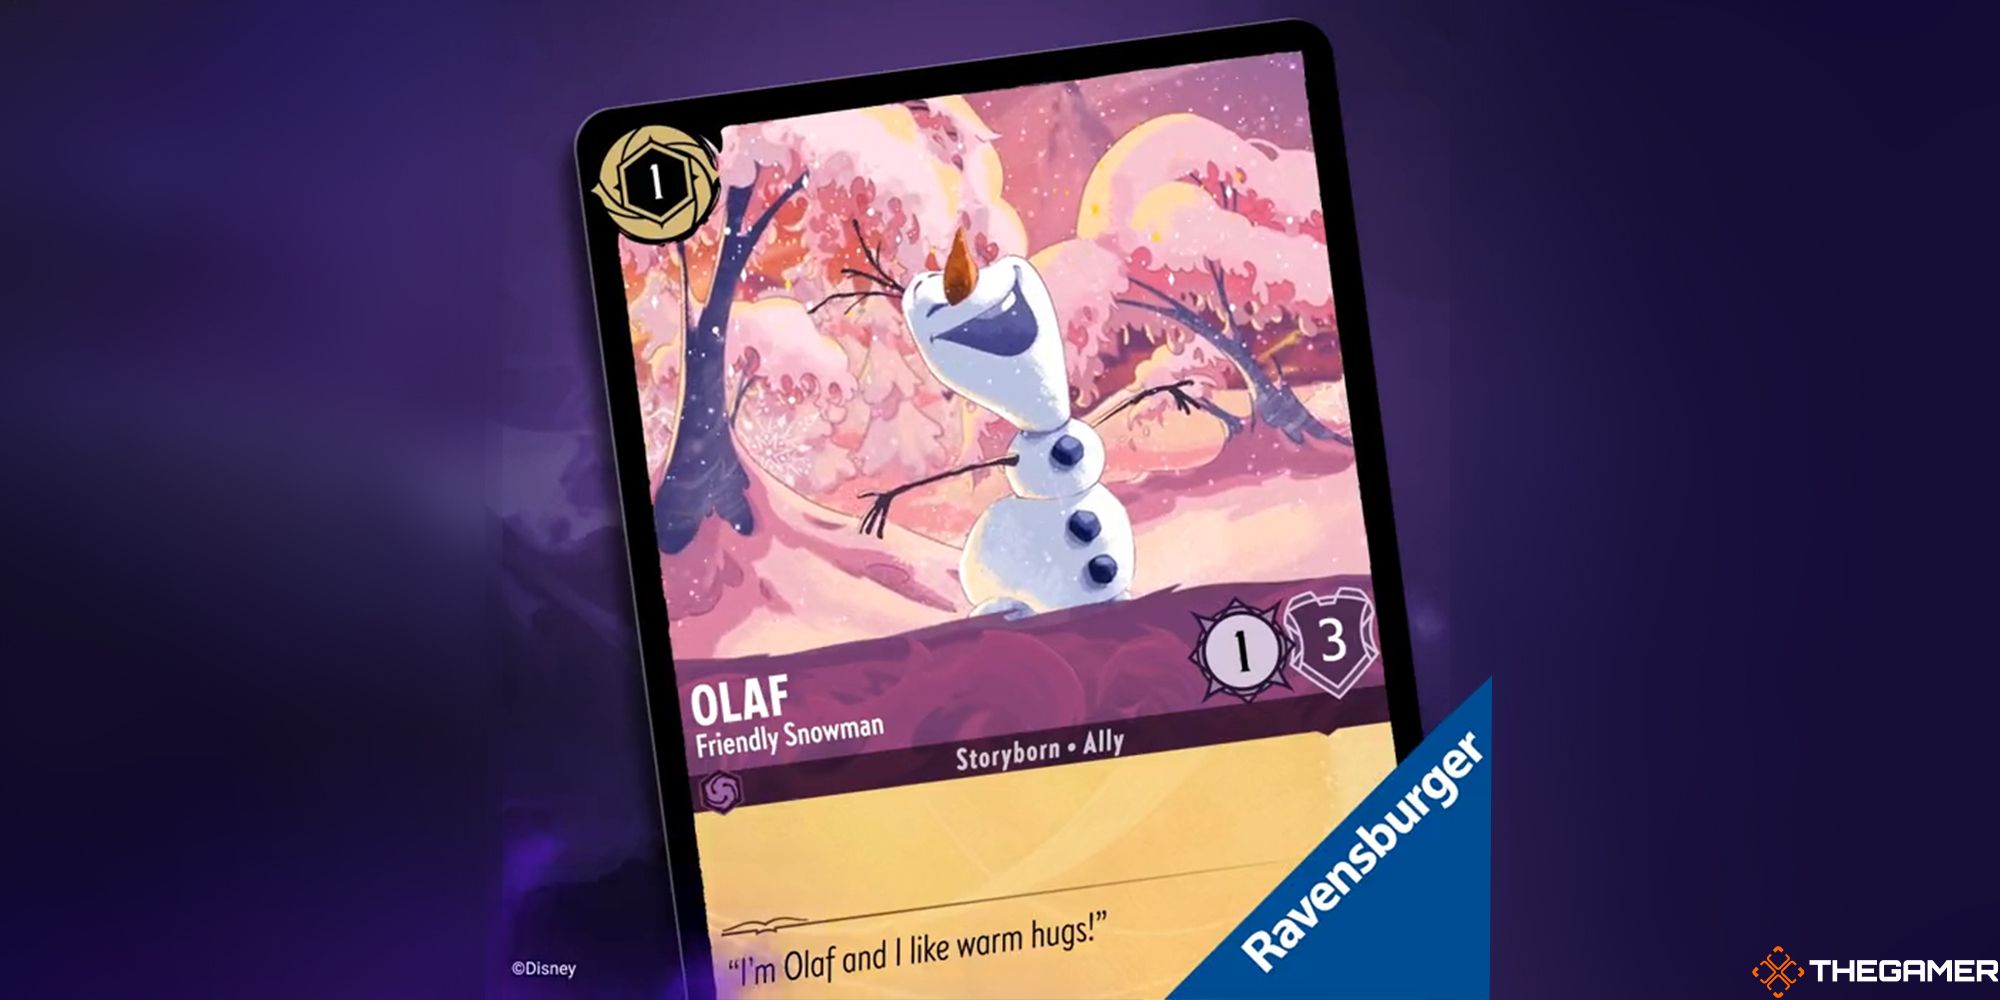 Olaf card from disney lorcana showing the snowman smiling with his arms spread in glee